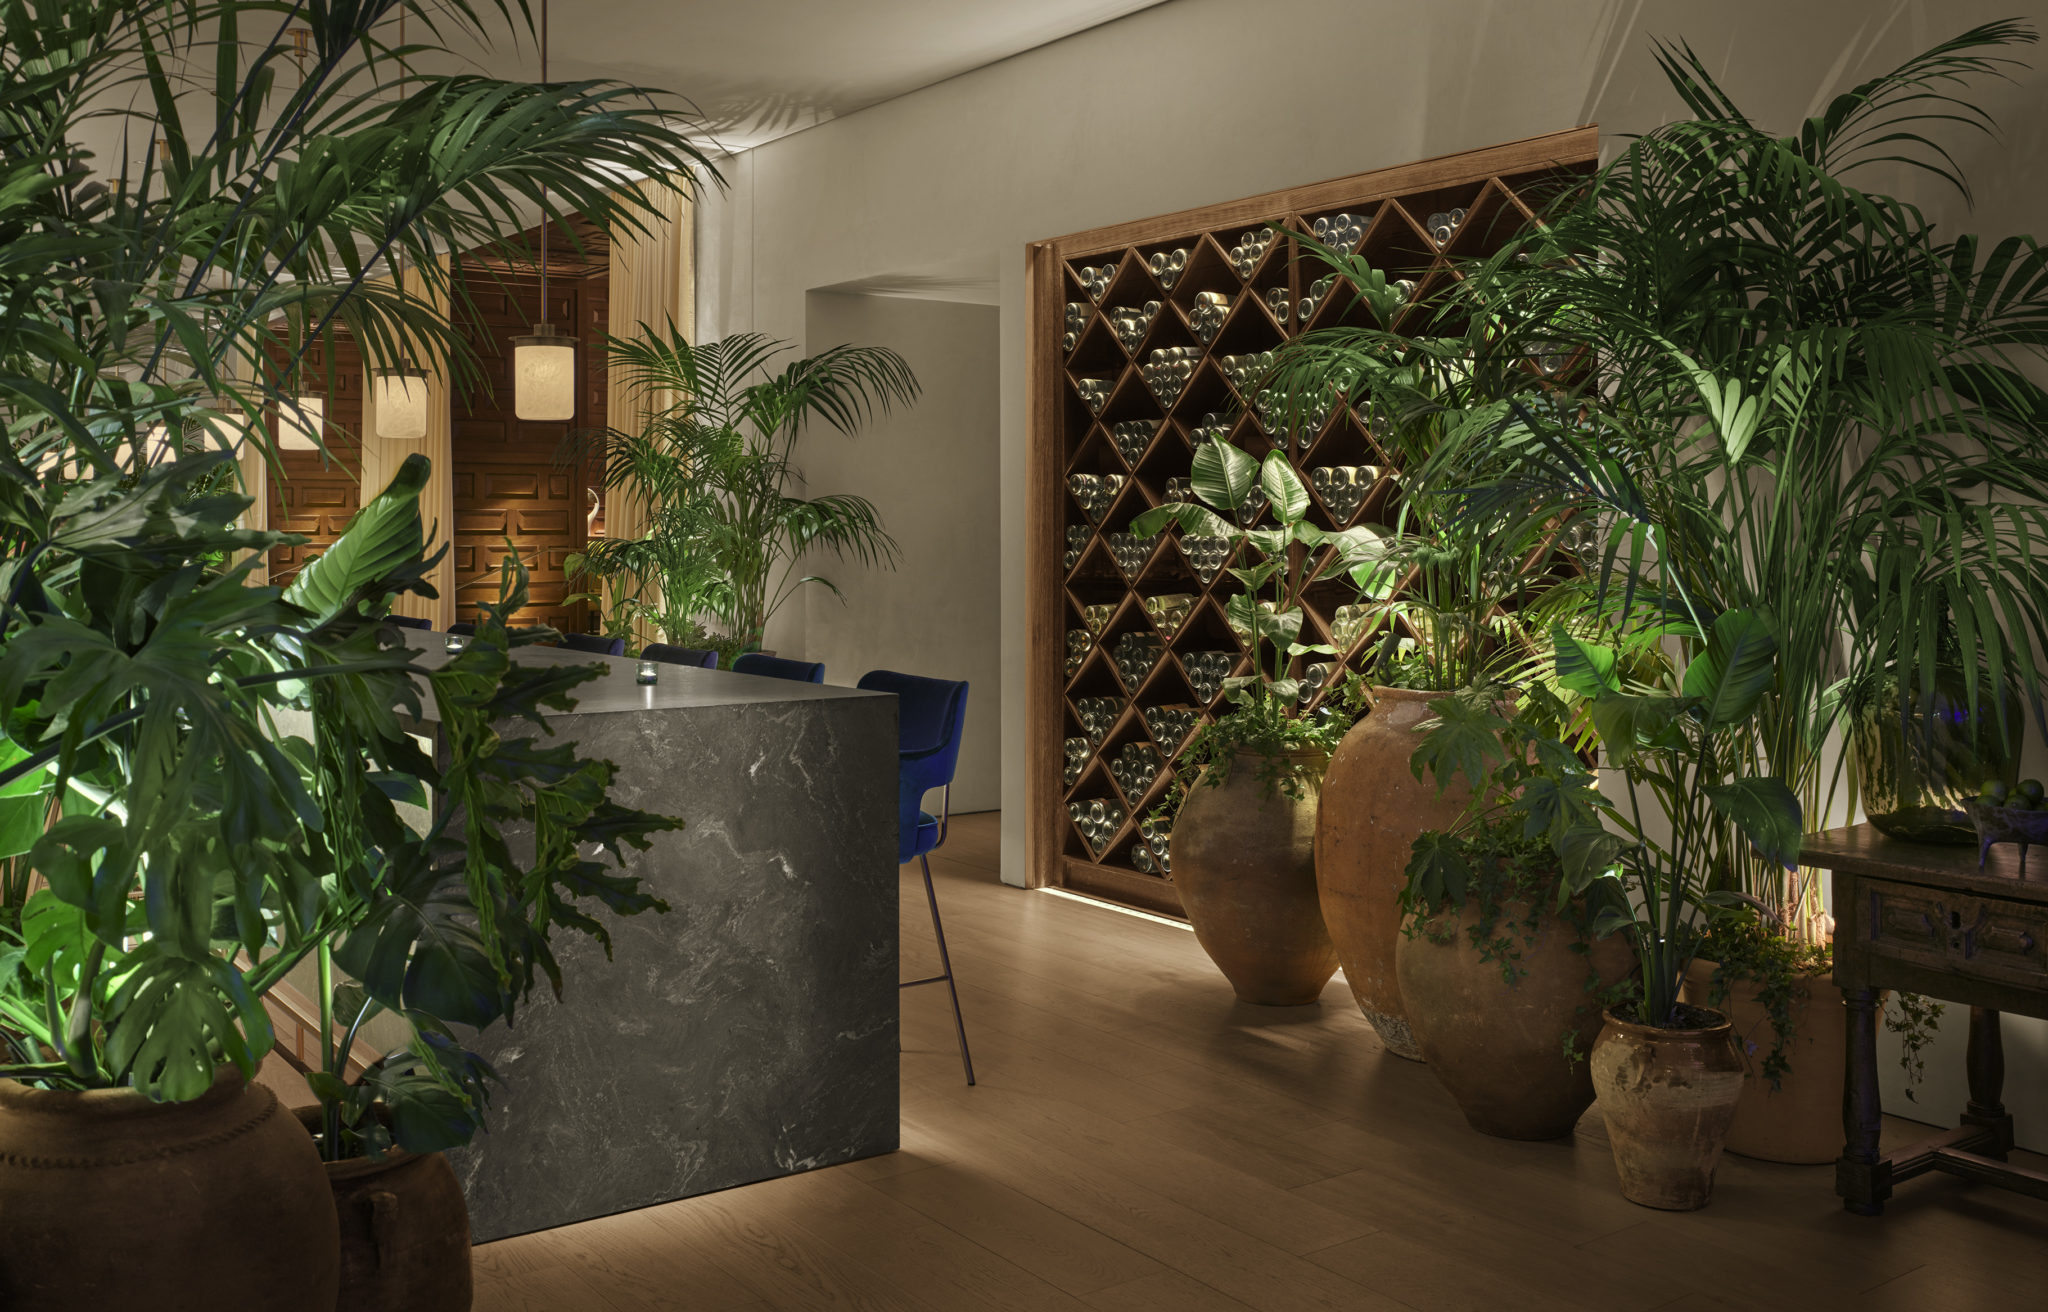 Wine room with large potted plants